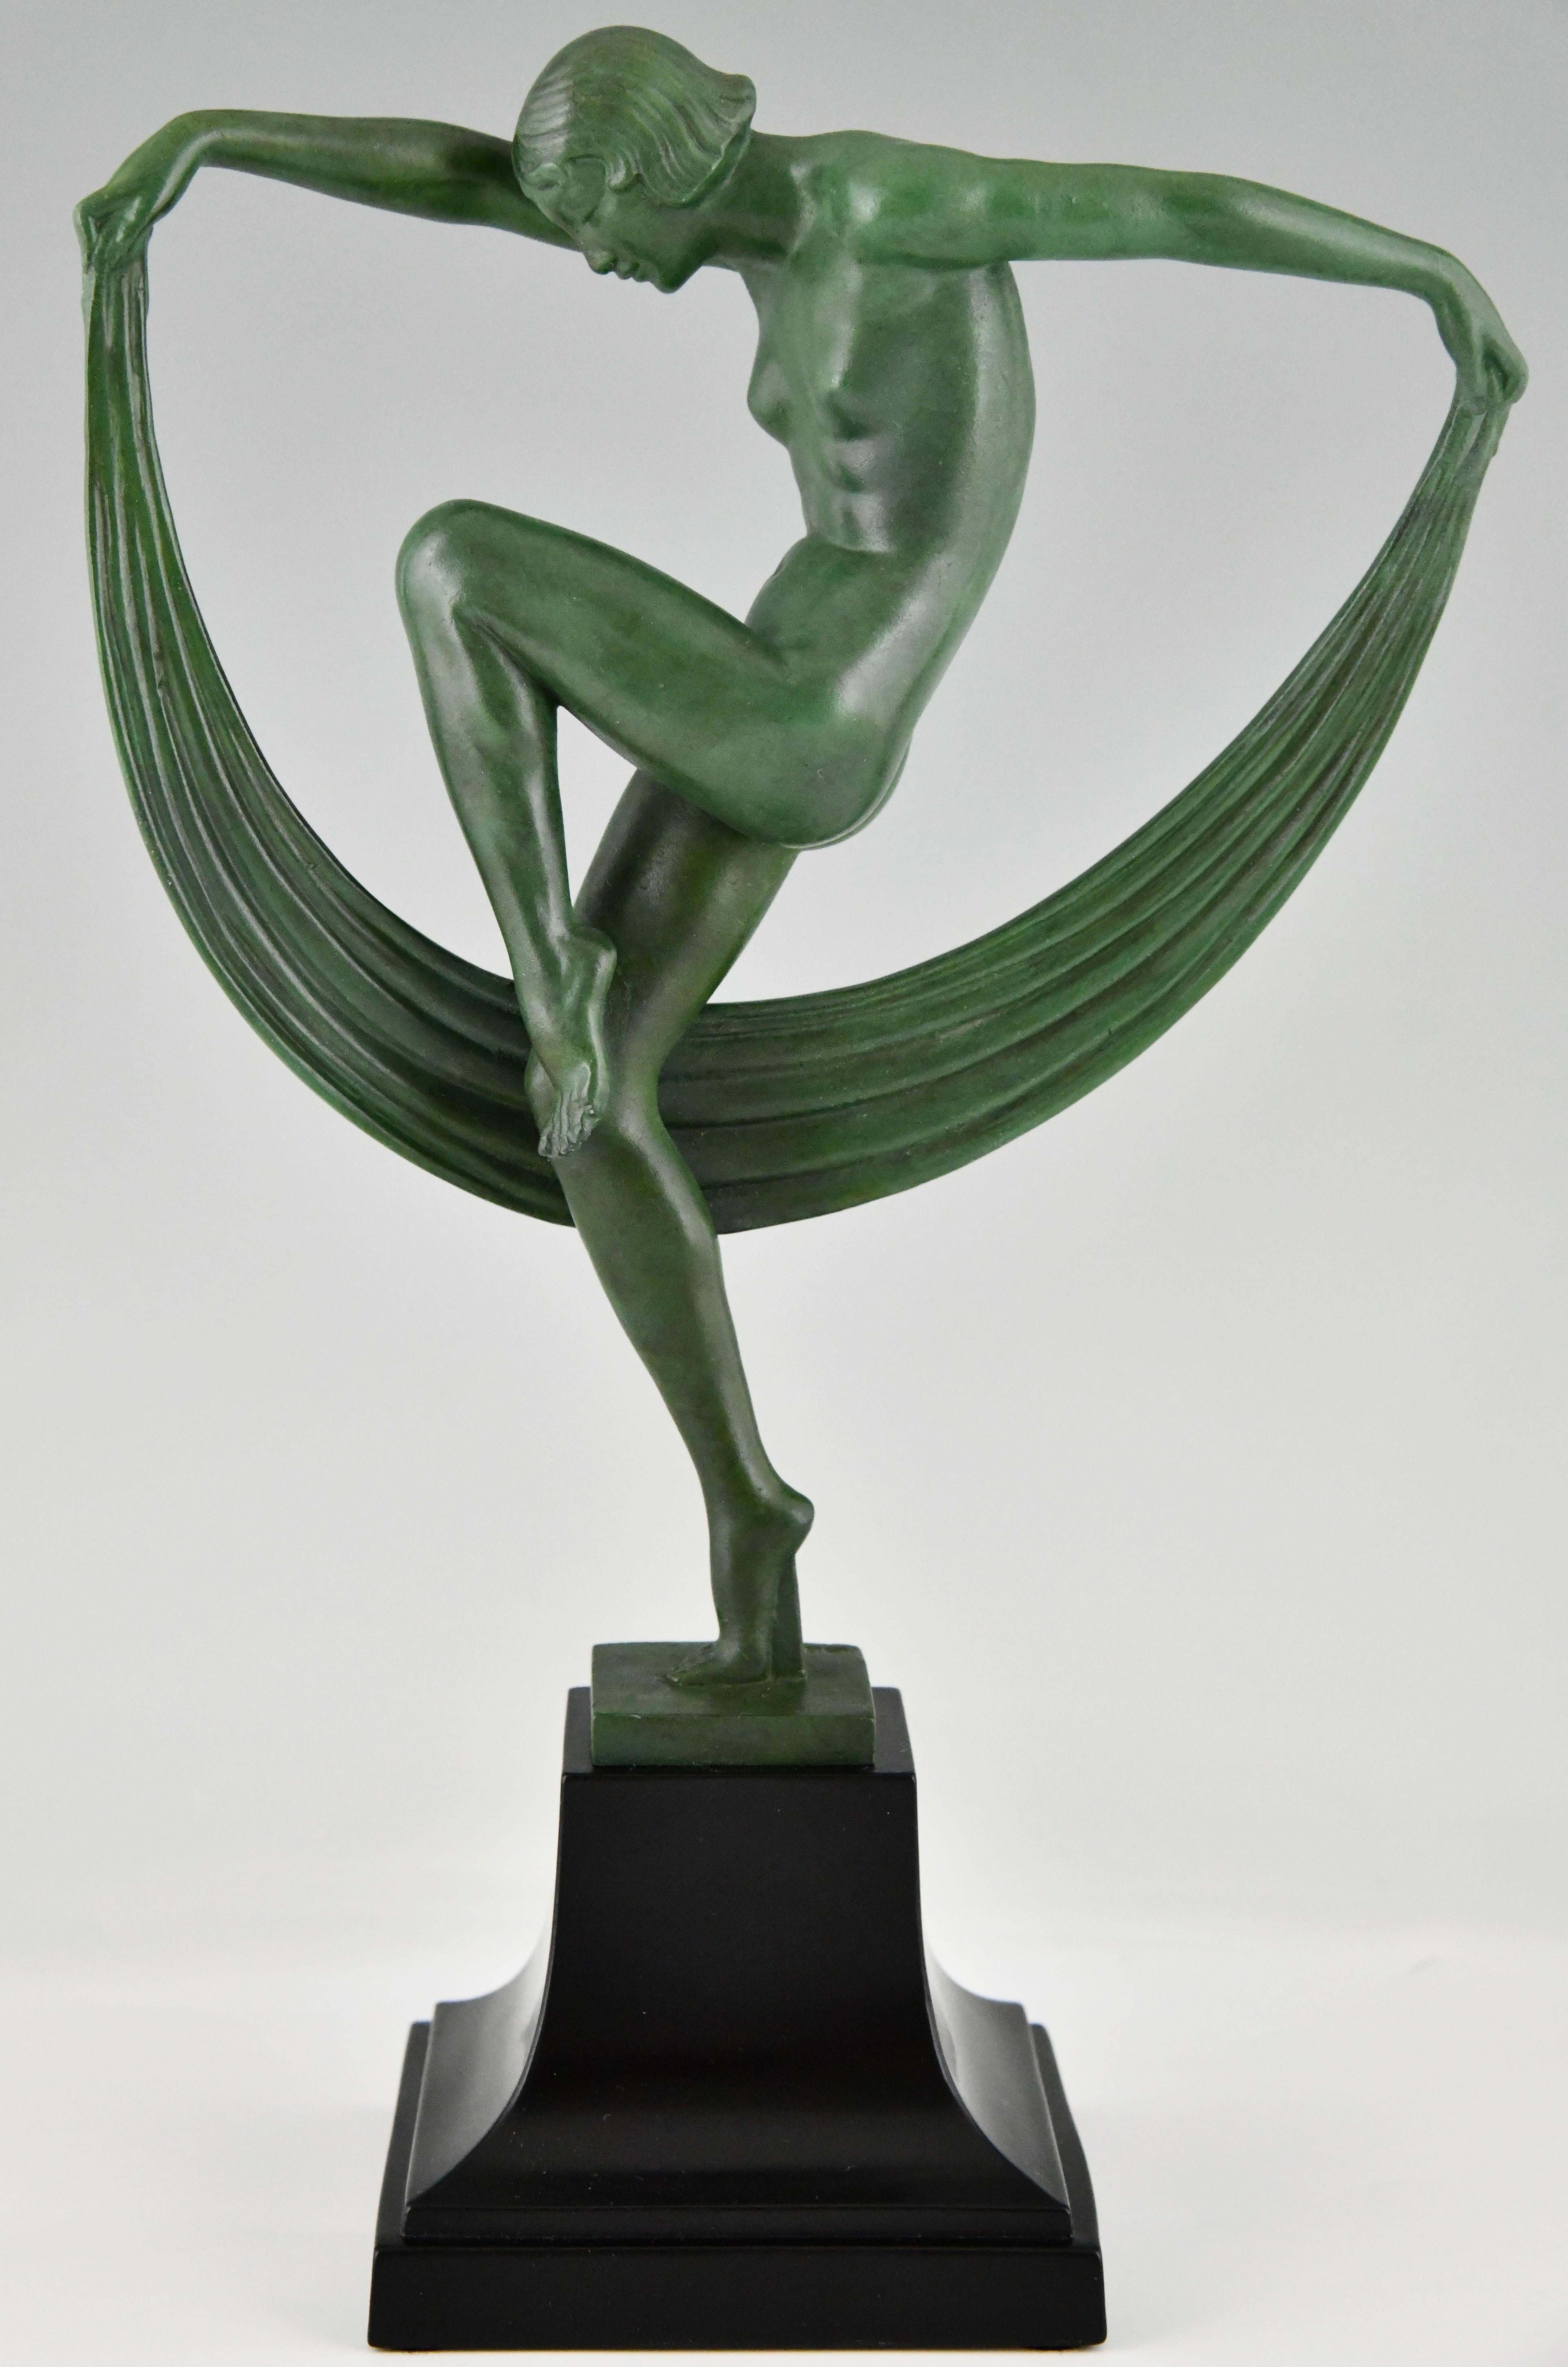 Art Deco sculpture Folie nude scarf dancer signed Denis and cast at the Max Le Verrier foundry.
Patinated metal. France 1930.
This sculpture is illustrated in:
Bronzes, sculptors and founders, H. Berman, Abage.